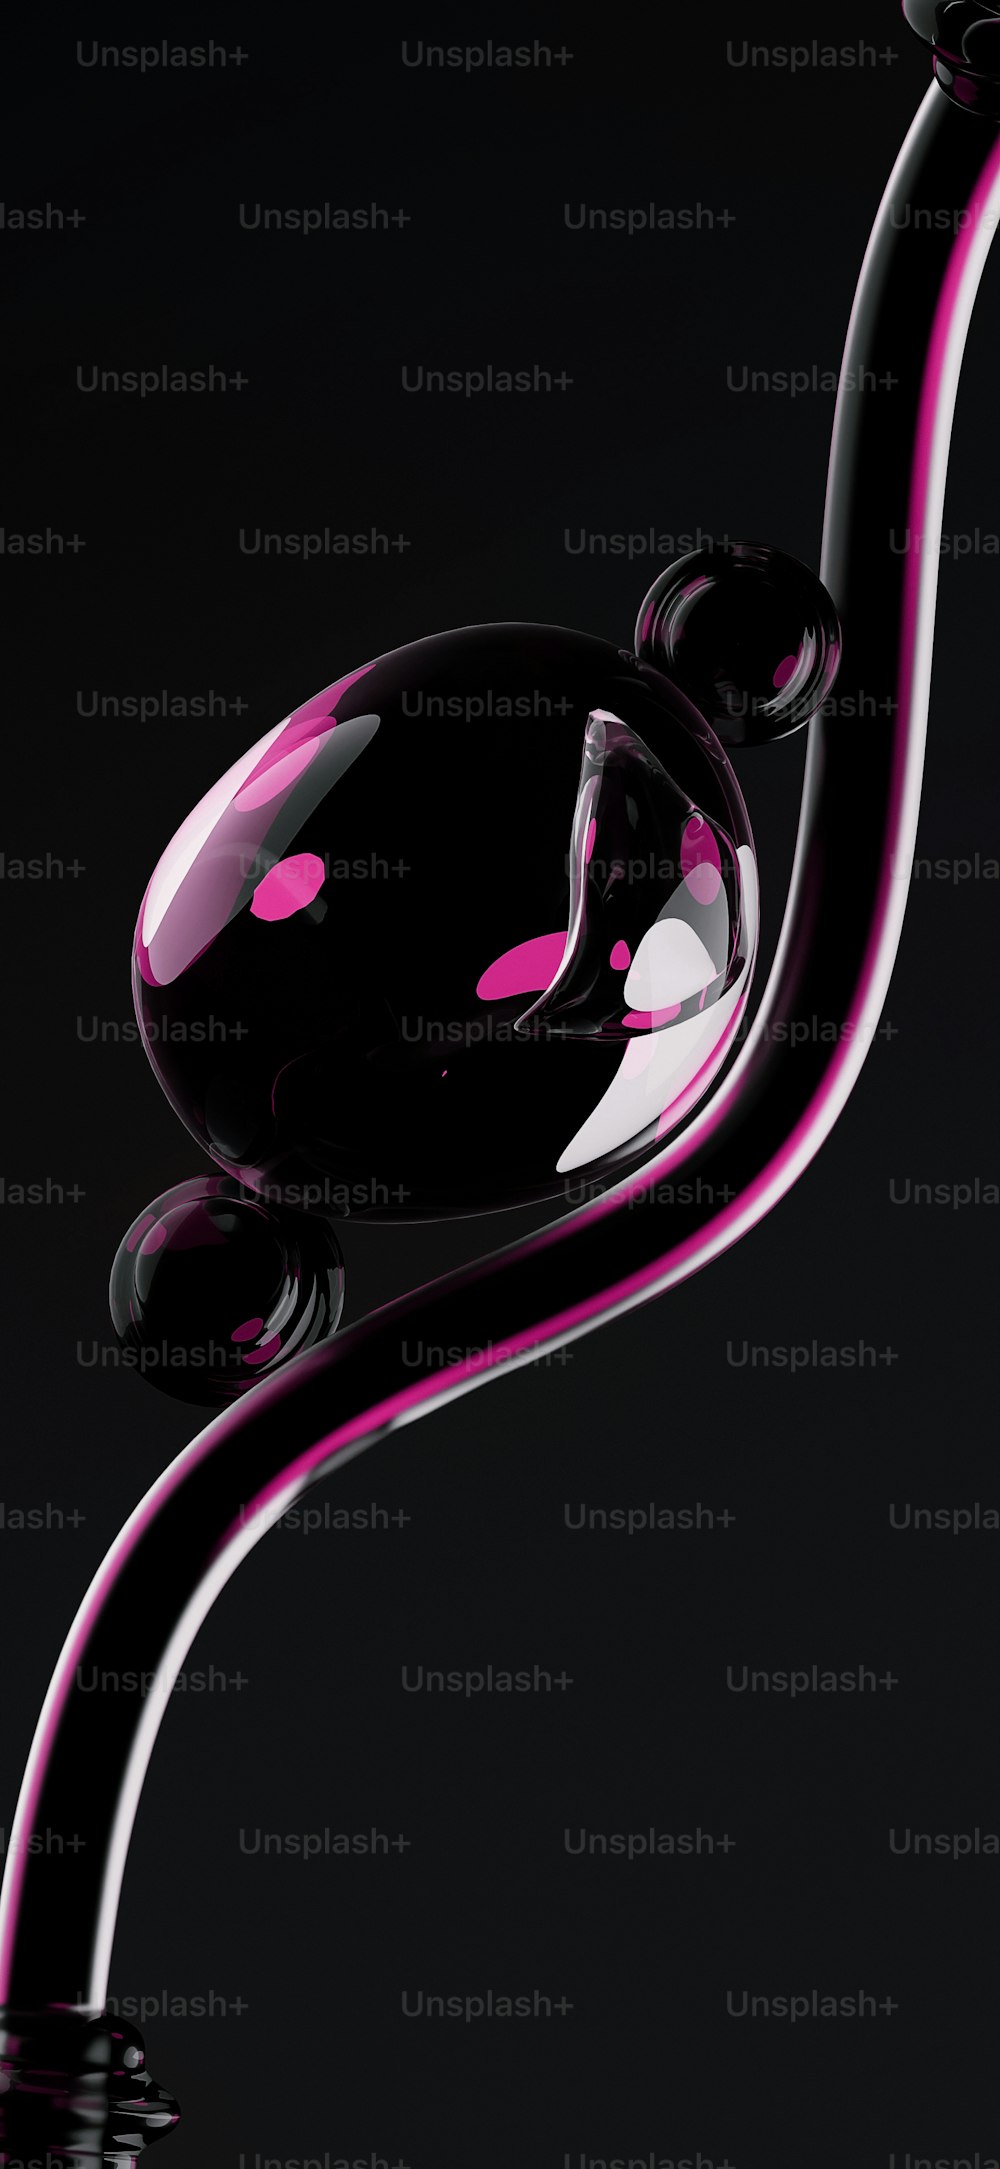 a black and pink glass object on a black background